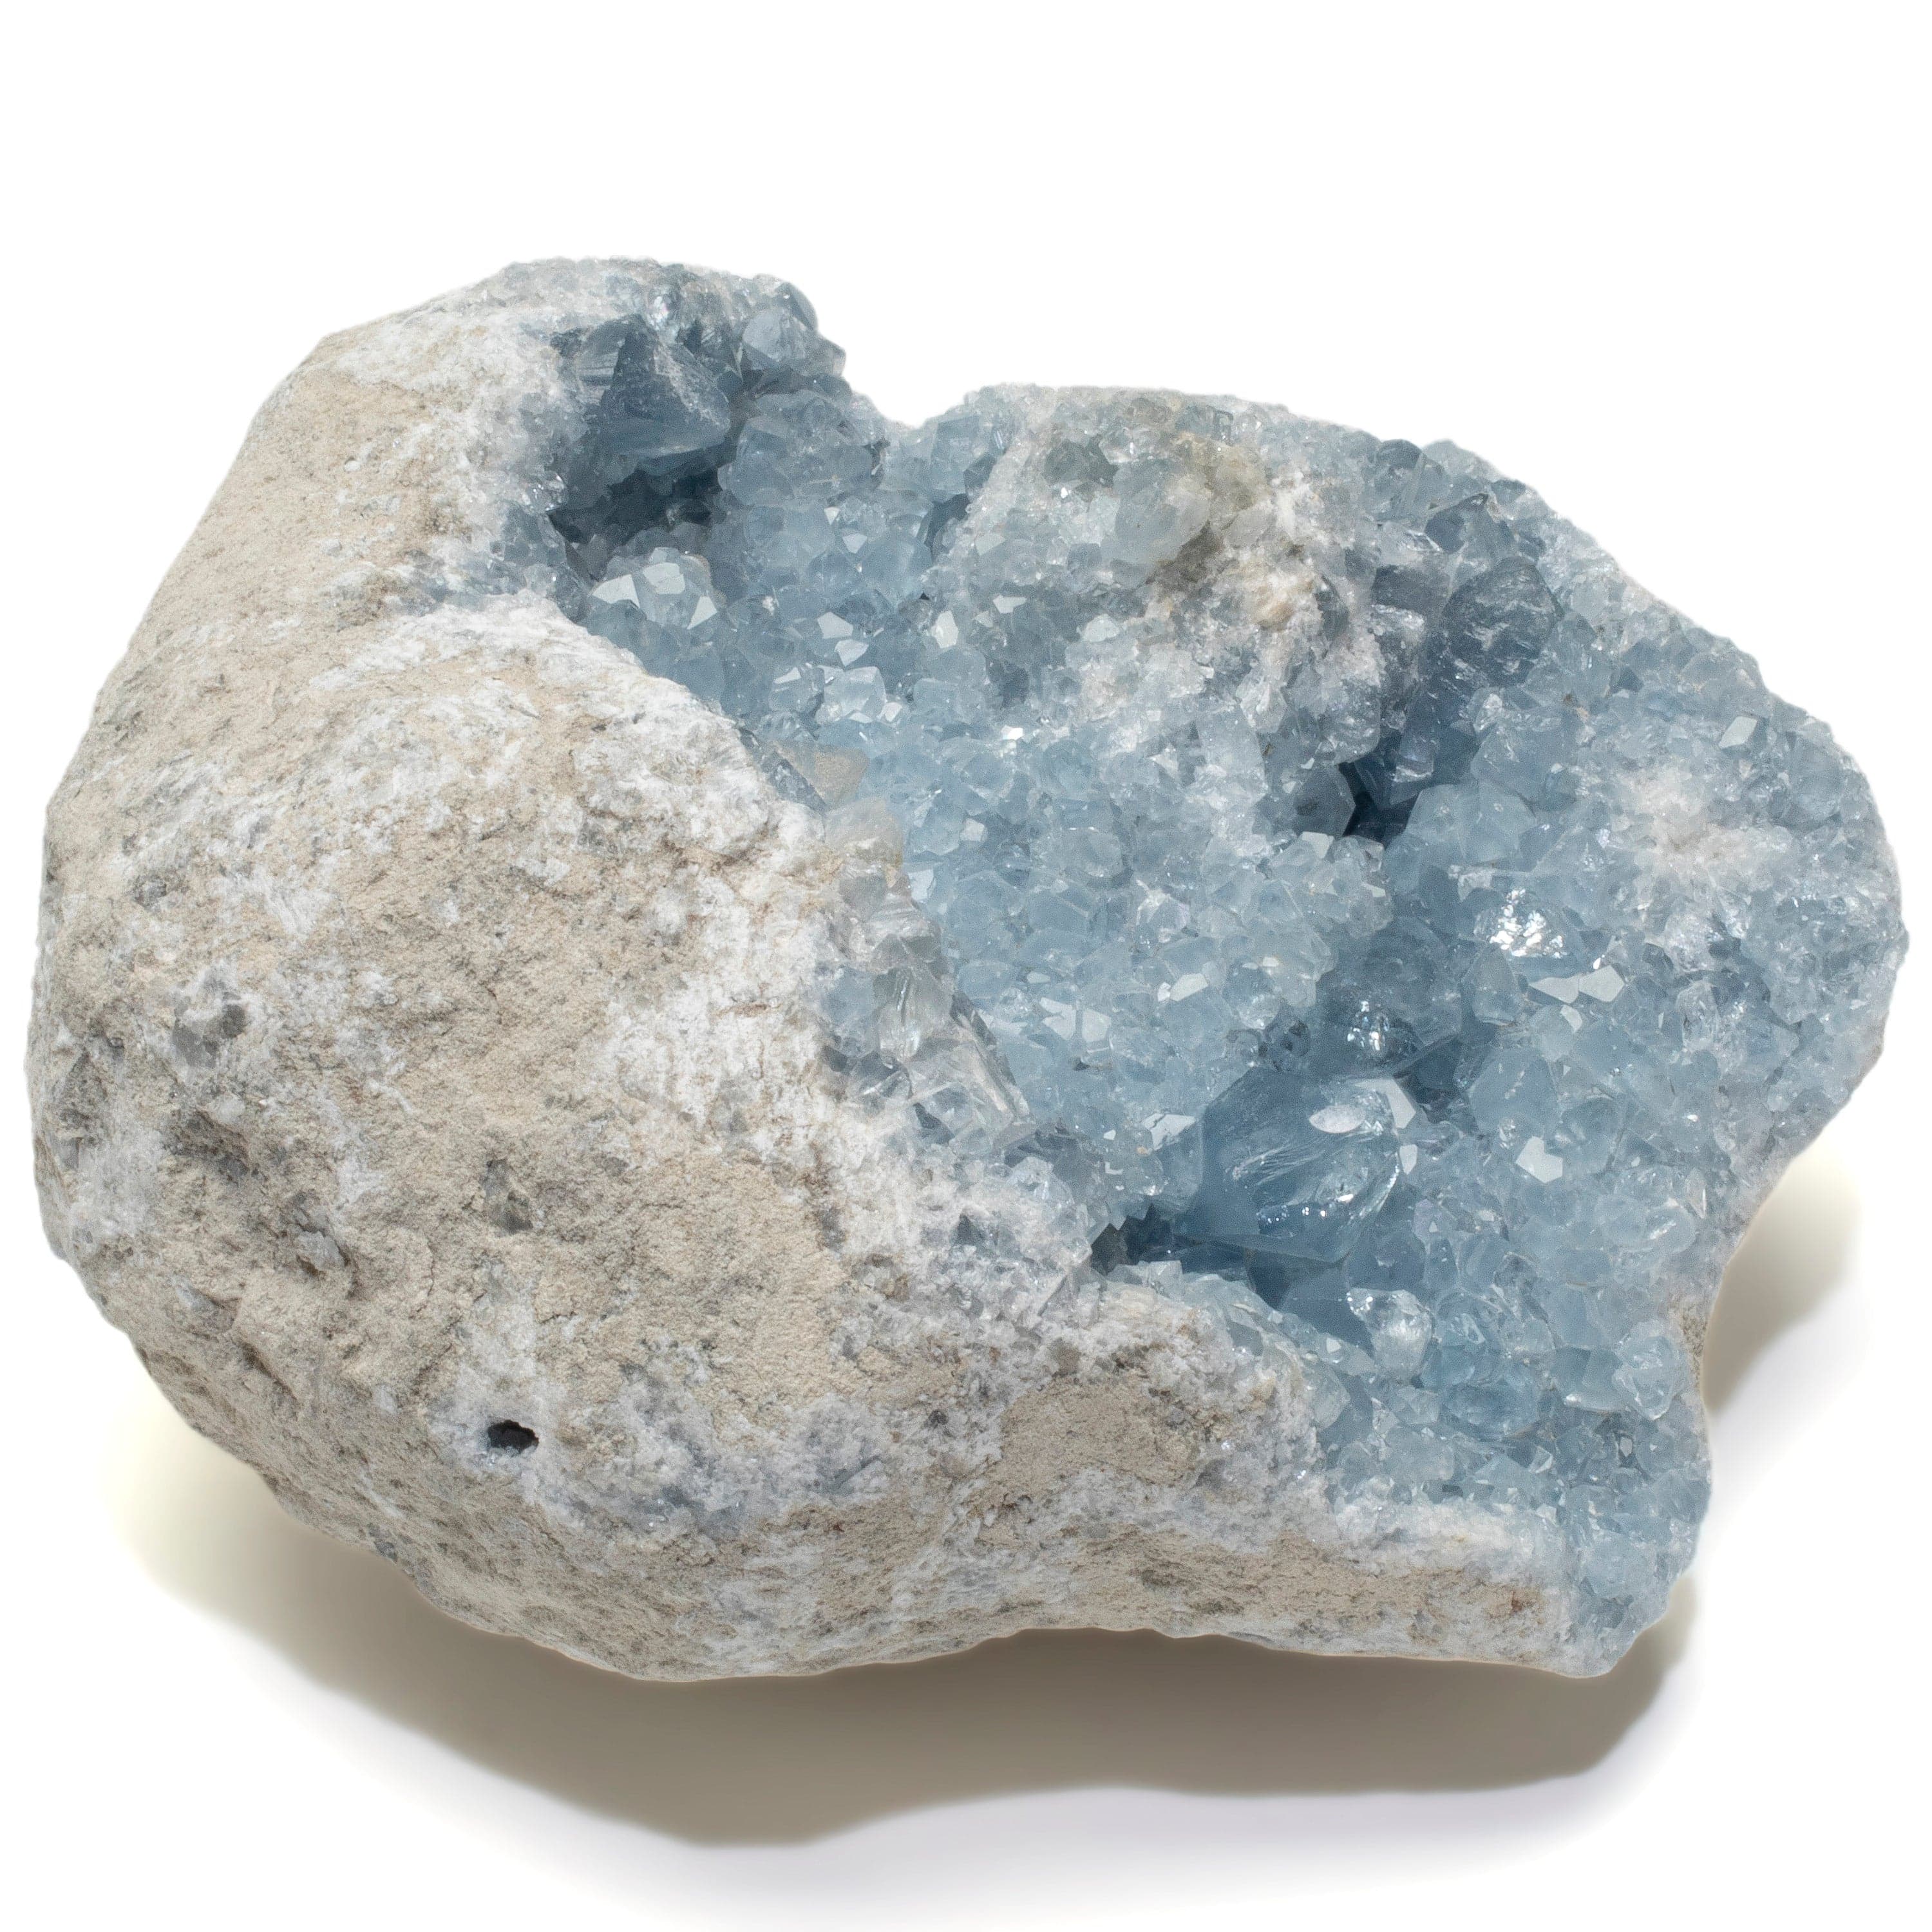 Kalifano Celestite Natural Celestite Crystal Cluster Geode from Madagascar - 7 in. CG1700.001